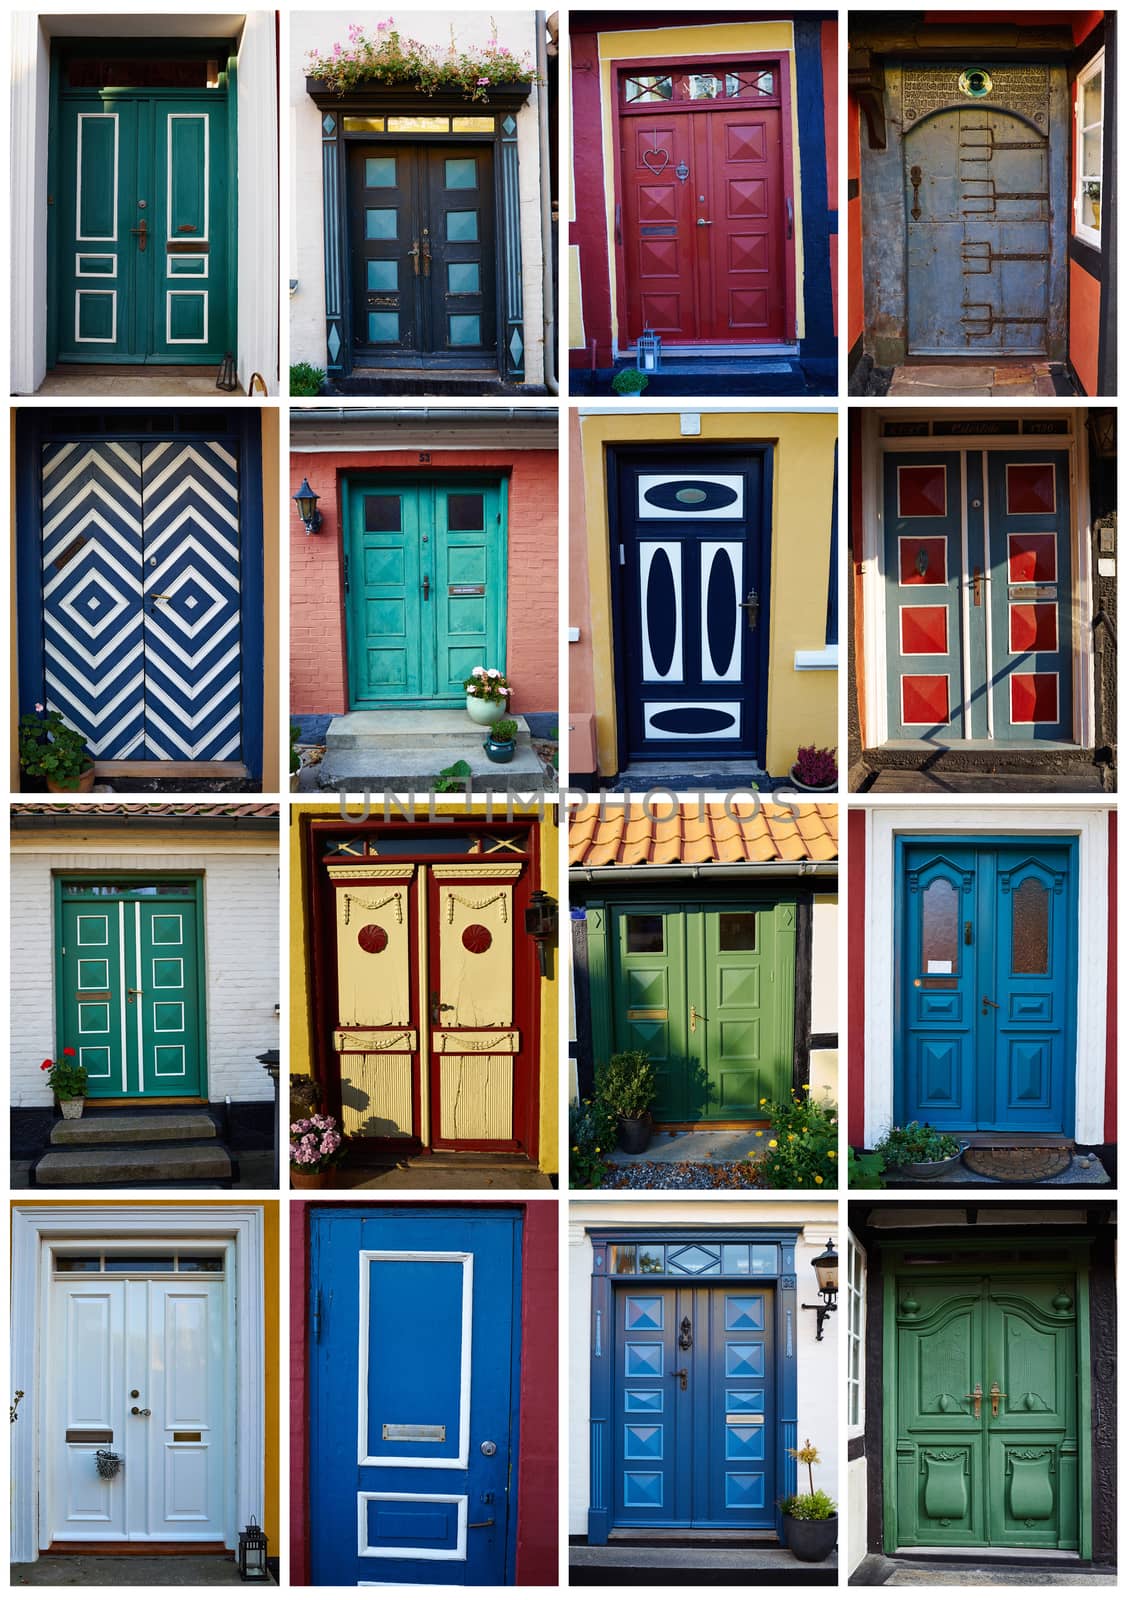 Collage of traditional front doors Denmark by Ronyzmbow